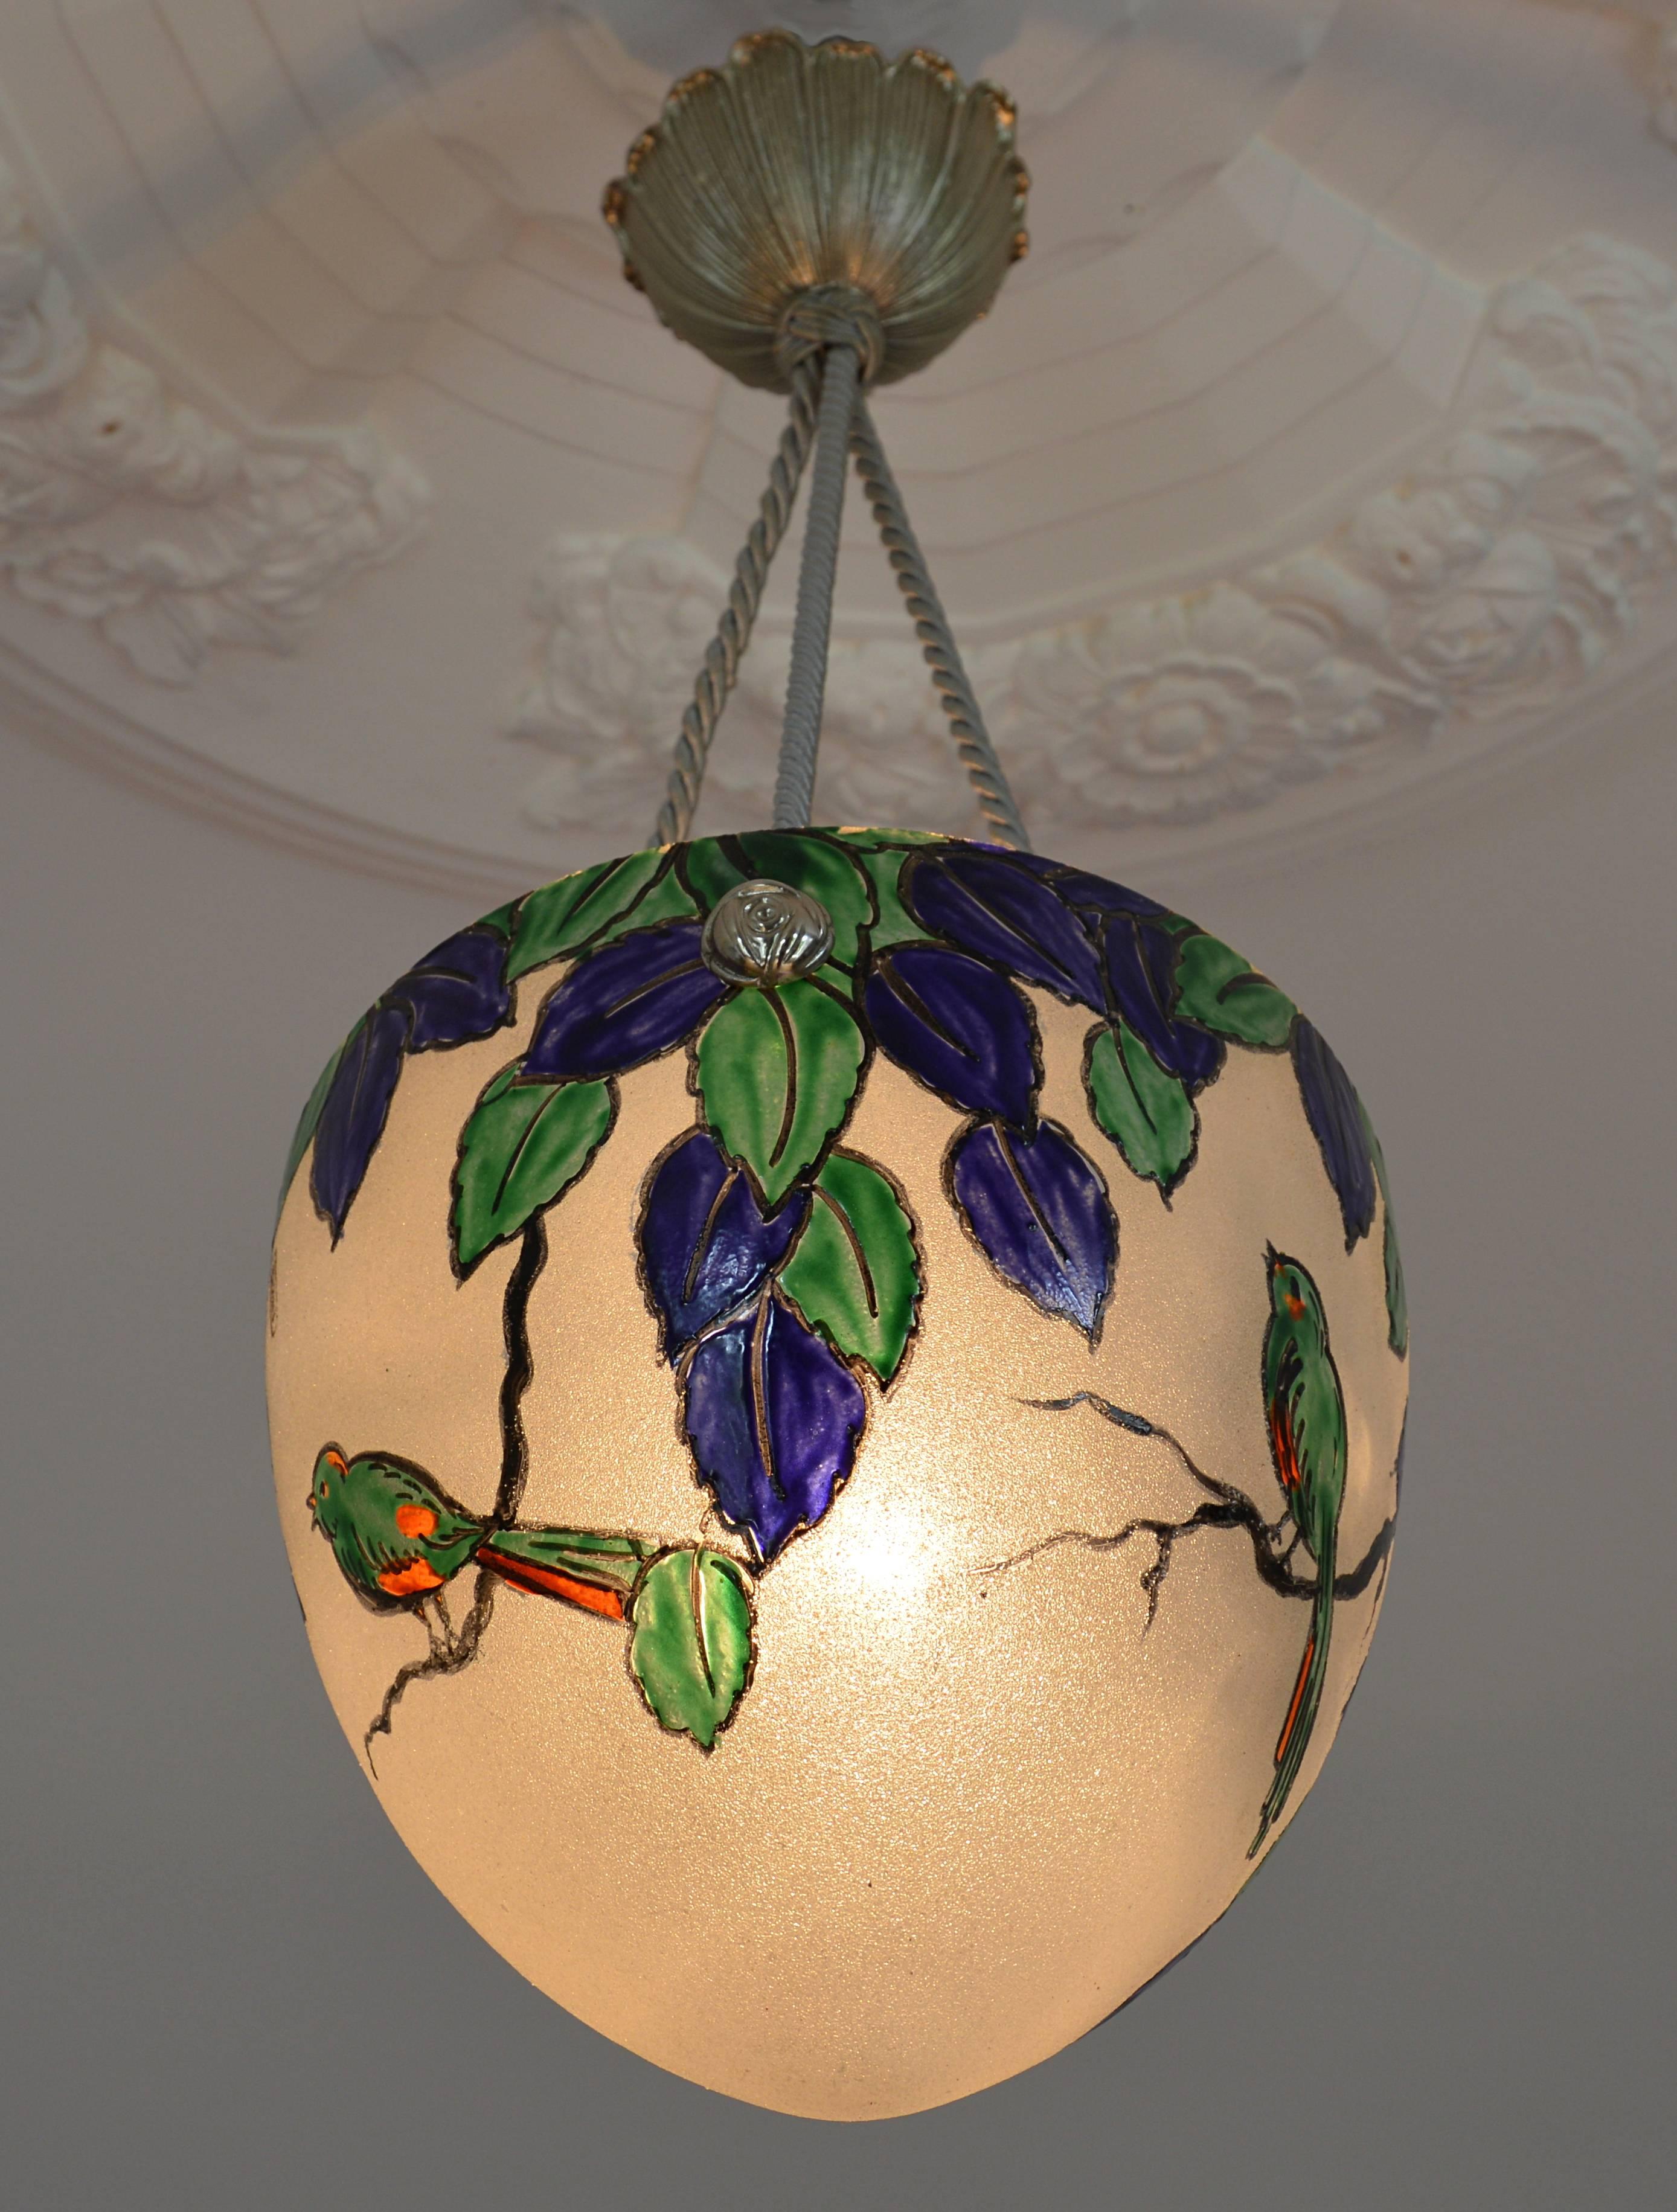 French Art Deco pendant by Leune, 28bis rue du Cardinal Lemoine, Paris, France, circa 1925. Granite glass shade with enameled pattern. Three birds in a tree. The bronze and tissue fixture is a new reproduction of original 1920s fixture, to make this